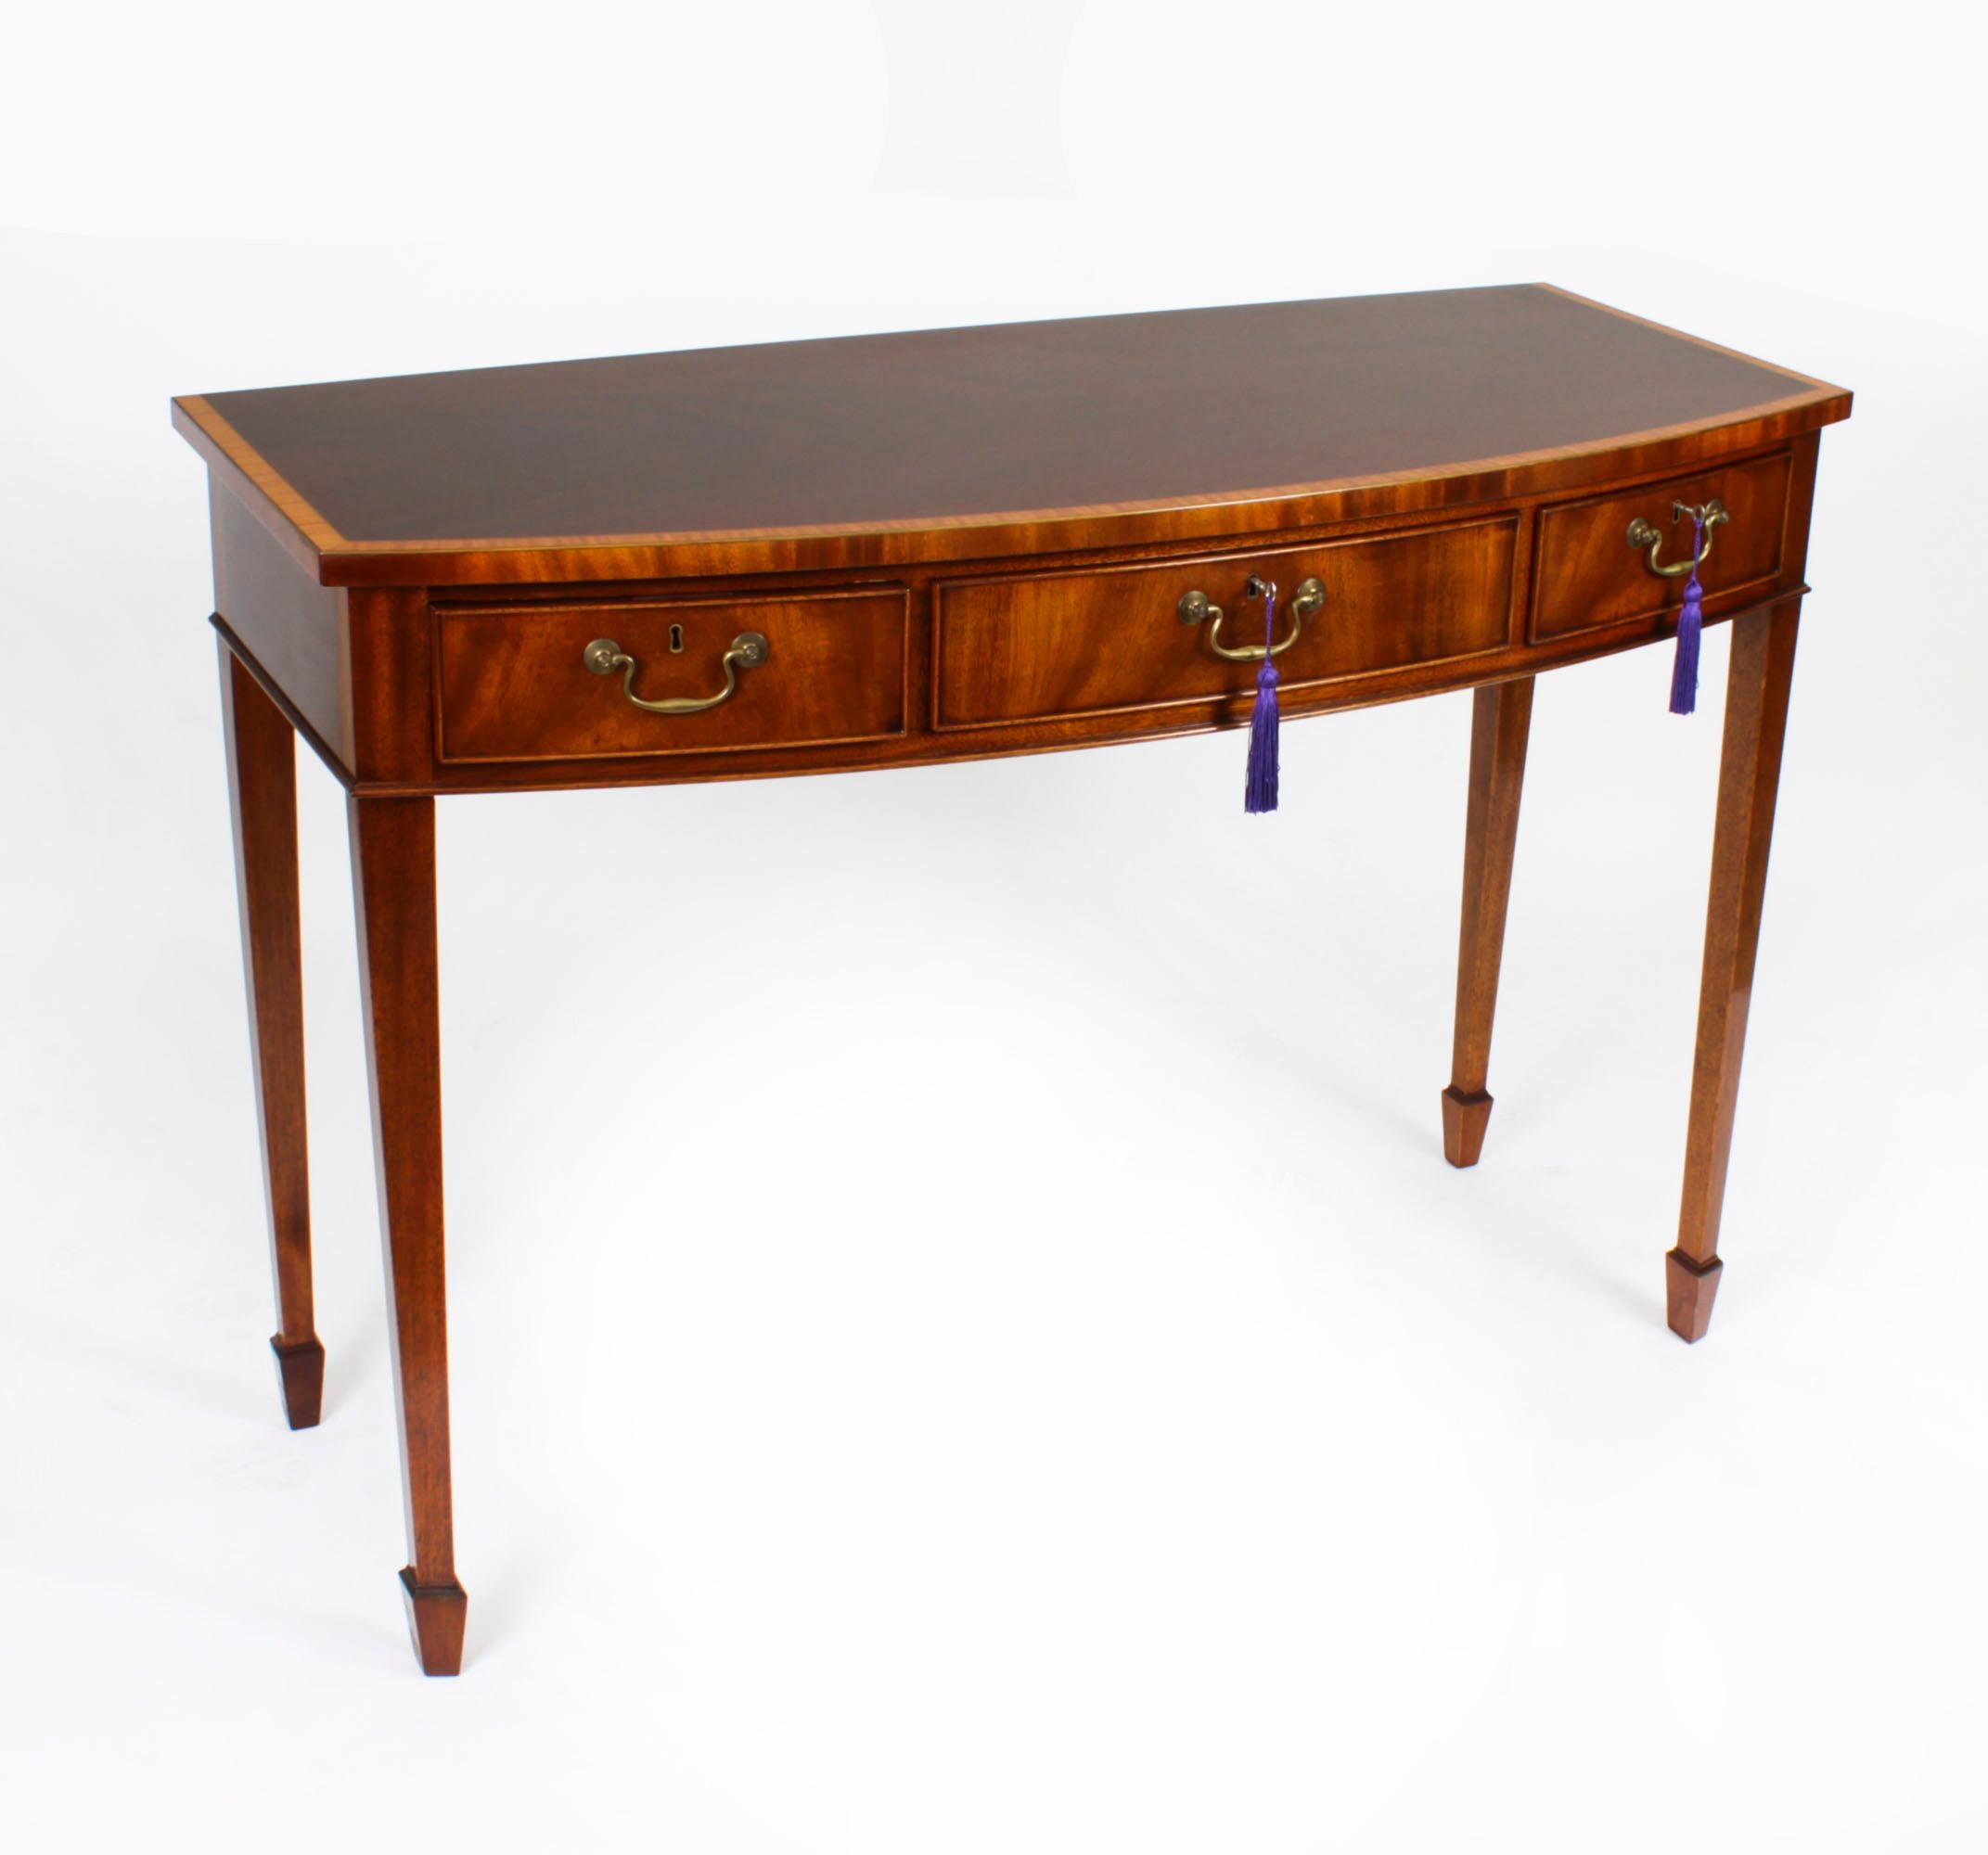 This is a fabulous Vintage Regency Revival bow front console serving table by the master cabinet maker William Tillman, Circa 1980 in date.

It is made of stunning flame mahogany crossbanded in satinwood, fitted with three frieze drawers and